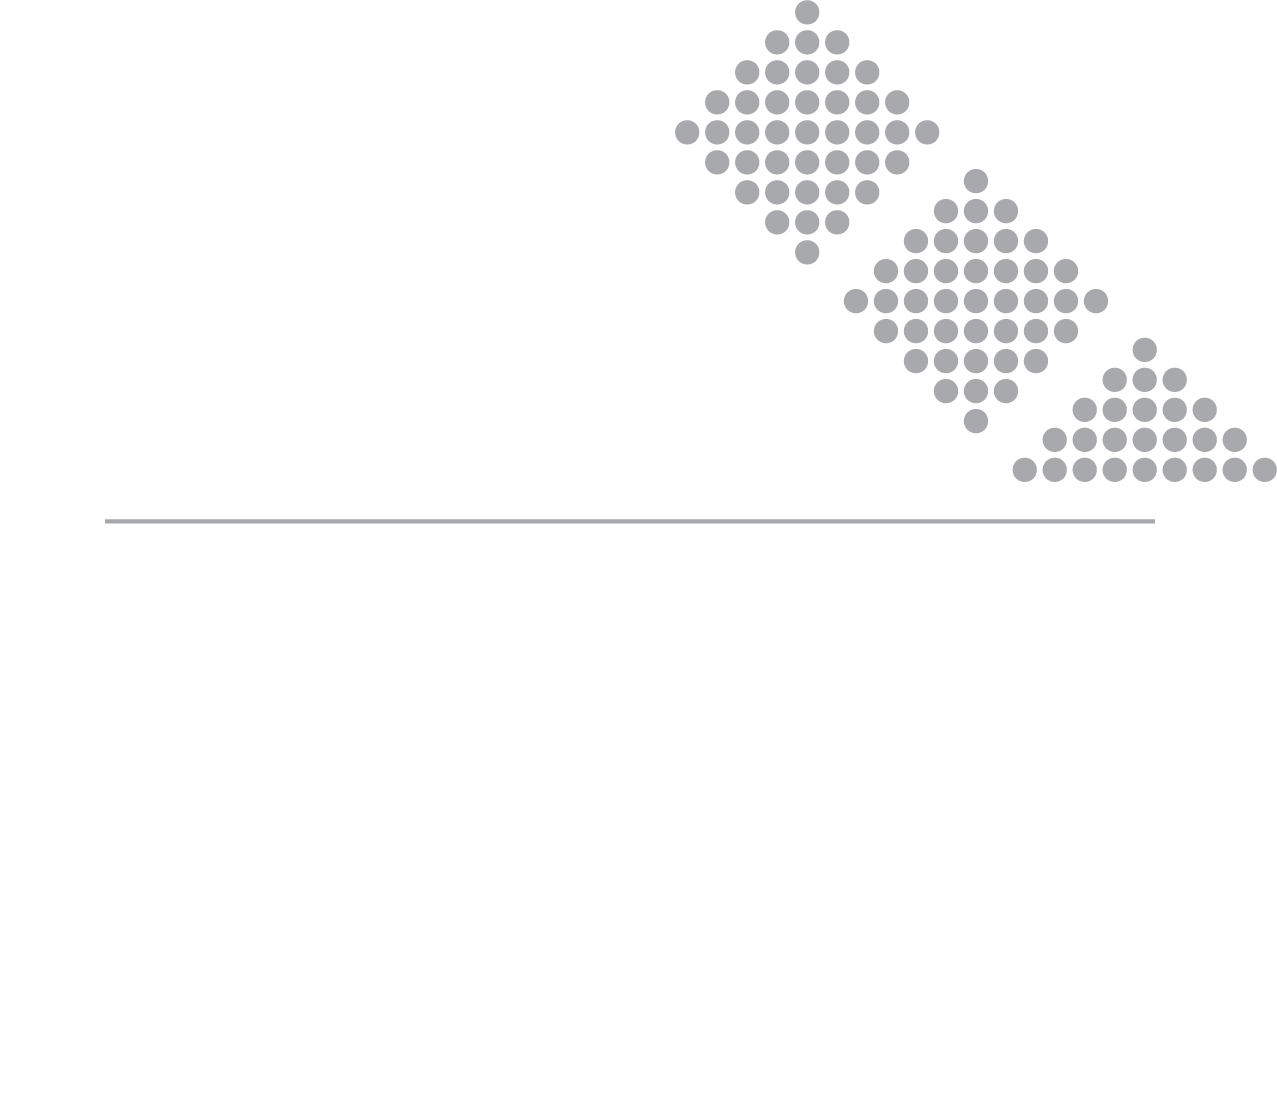 Swype Solutions